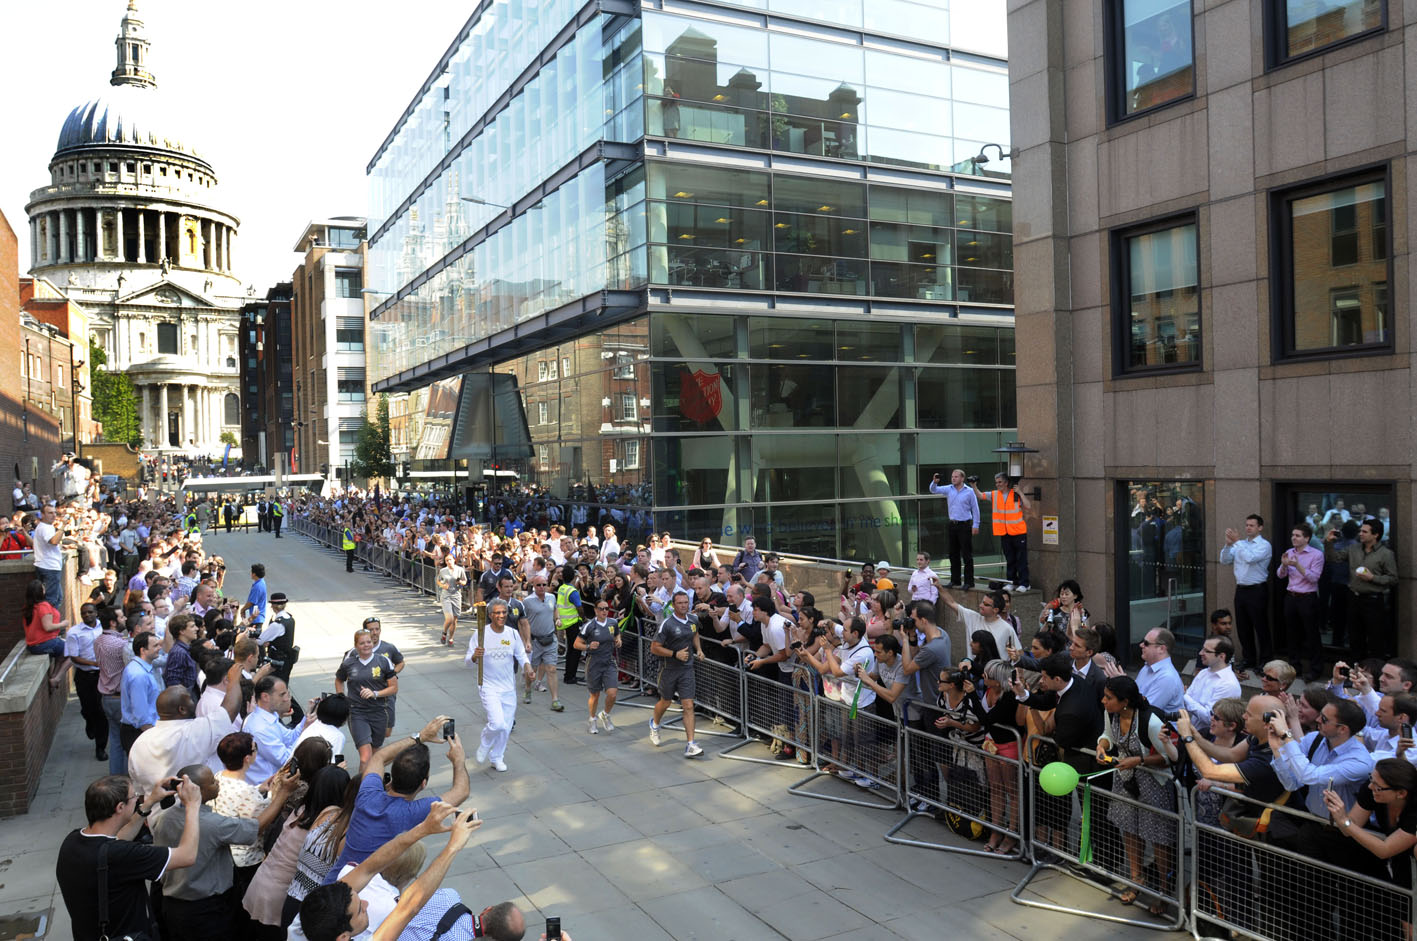 Enthusiastic crowds greet the Olympic Torch Relay as it is carried on to the north side of the Millenium Bridge in central London before being taken by a new torch bearer across the River ThamesÂ© Stefano Cagnoni - reportdigital.co.uk01789 262151 07831 121483info@reportdigital.co.ukwww.reportdigital.co.ukNUJ recommended terms & conditions apply. Moral rights asserted under Copyright Designs & Patents Act 1988. No part of this photo to be stored, reproduced, manipulated or transmitted by any means without permission.